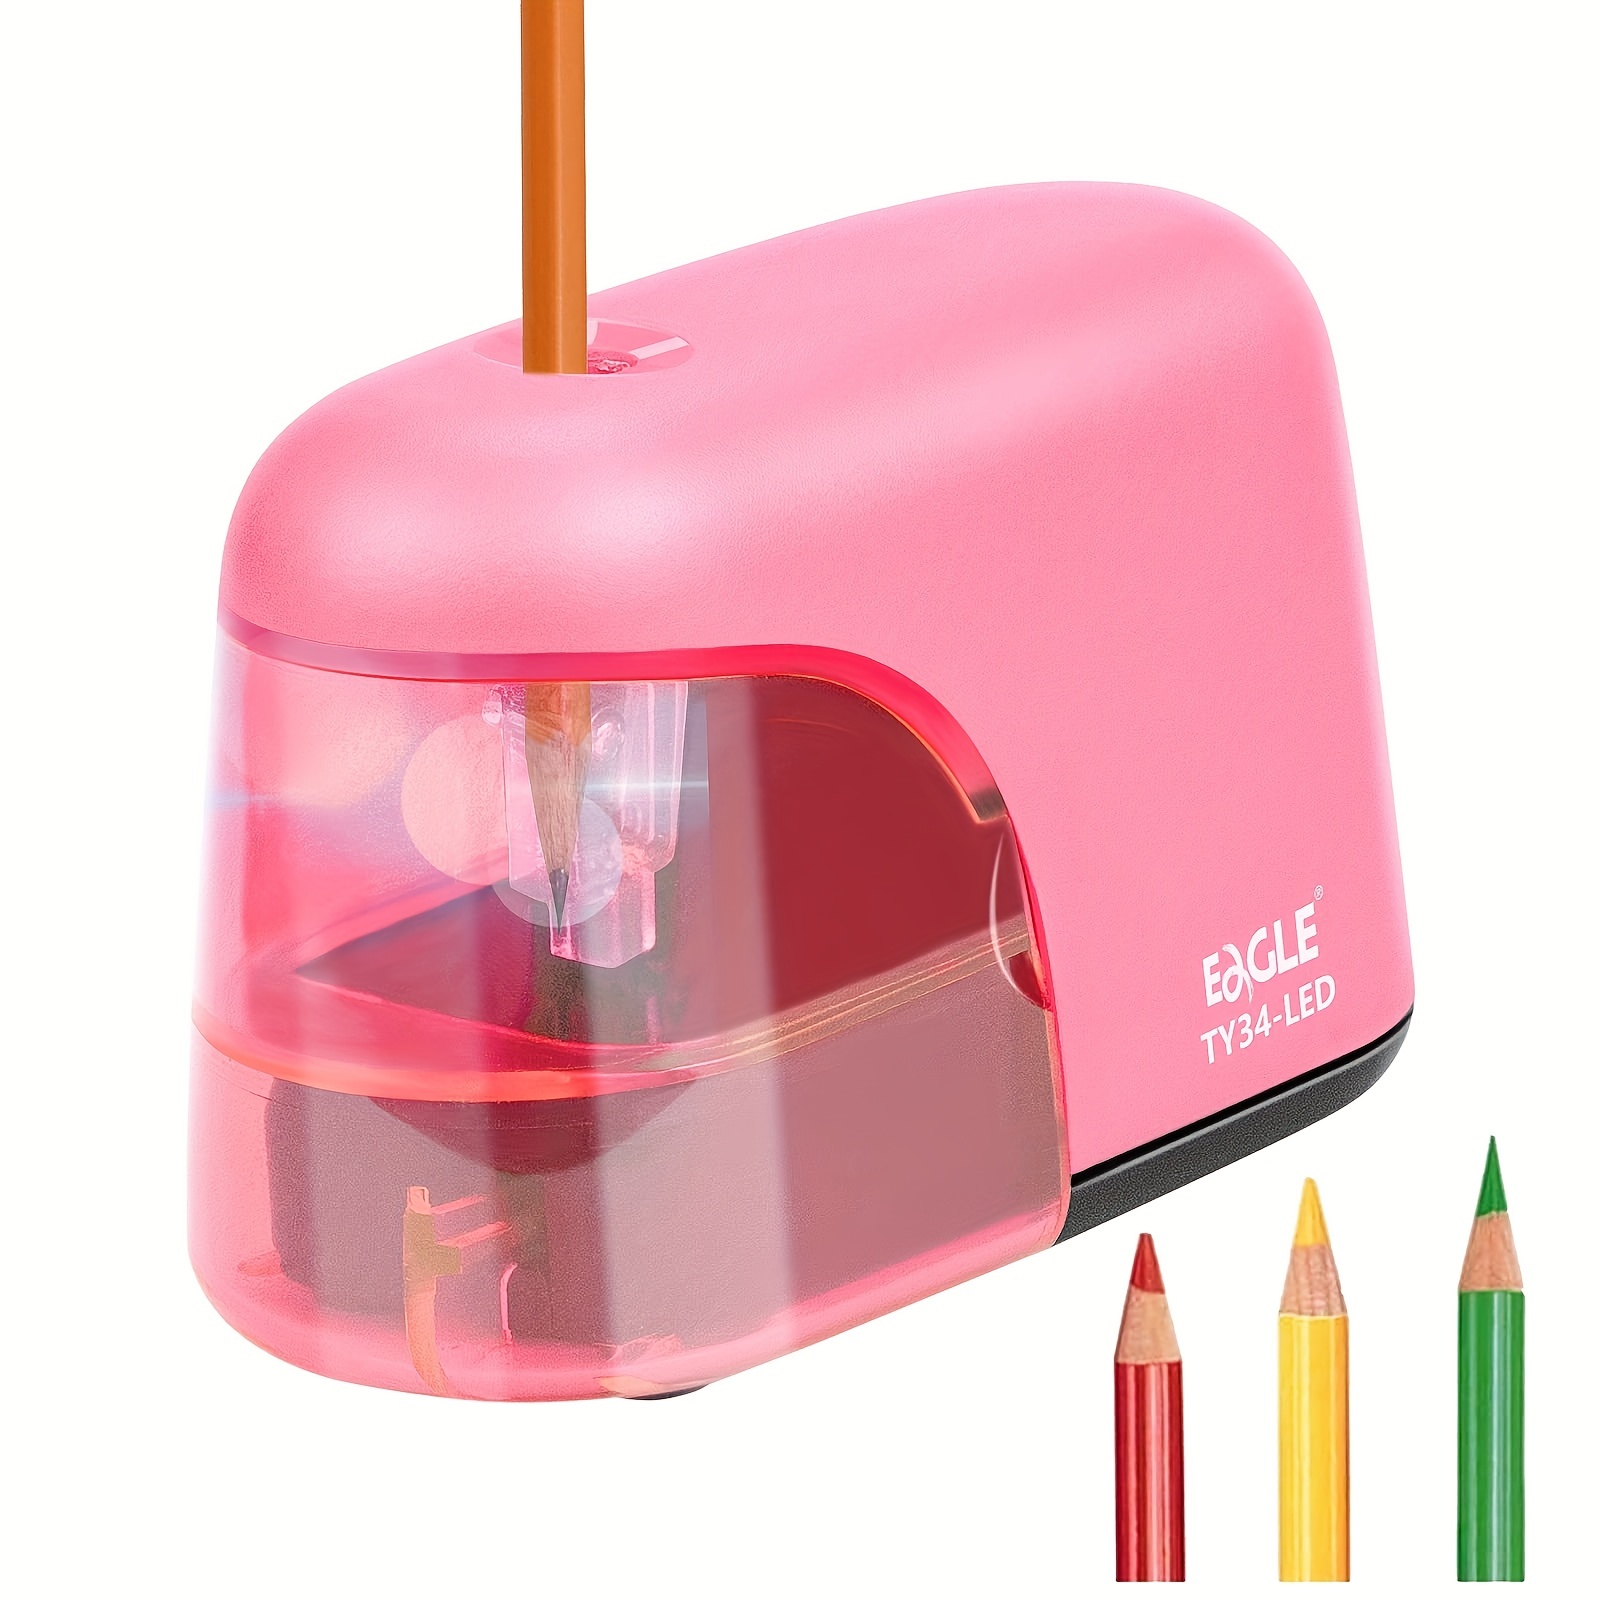 Pencil Sharpener Electric Pencil Sharpeners, Portable Pencil Sharpener  Kids, Blade to Fast Sharpen, Suitable for No.2/Colored Pencils(6-8mm)/School  Pencil Sharpener/Classroom/Office/Home ( 